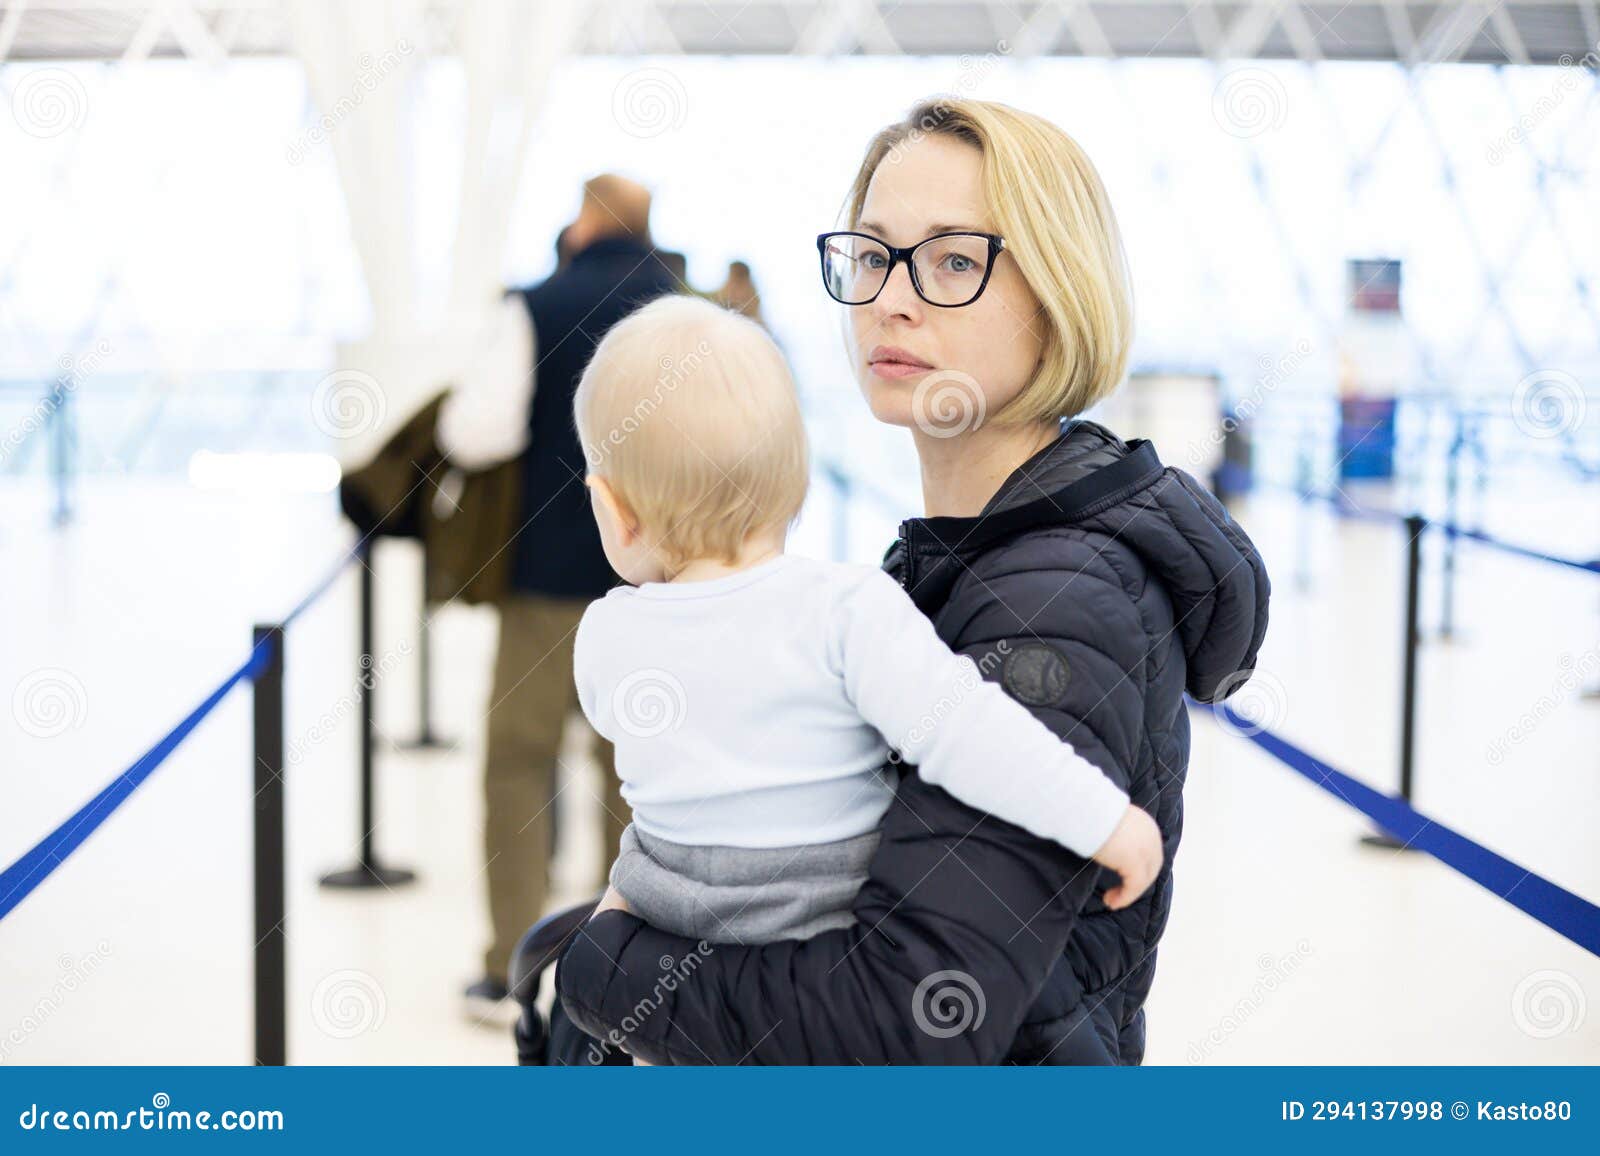 mother carying his infant baby boy child queuing at airport terminal in passport control line at immigrations departure